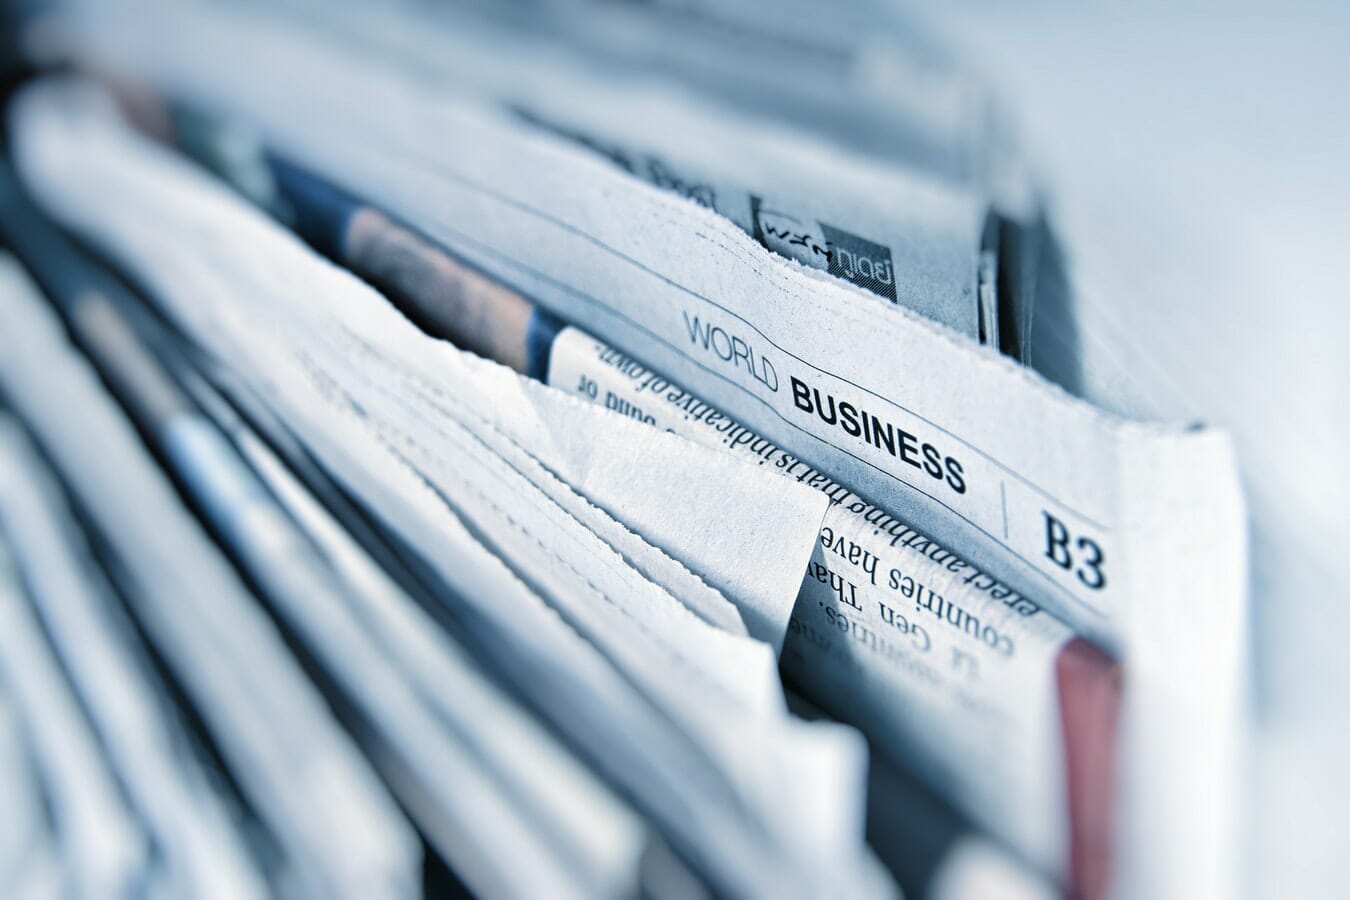 A close up of insider newspapers in a folder.